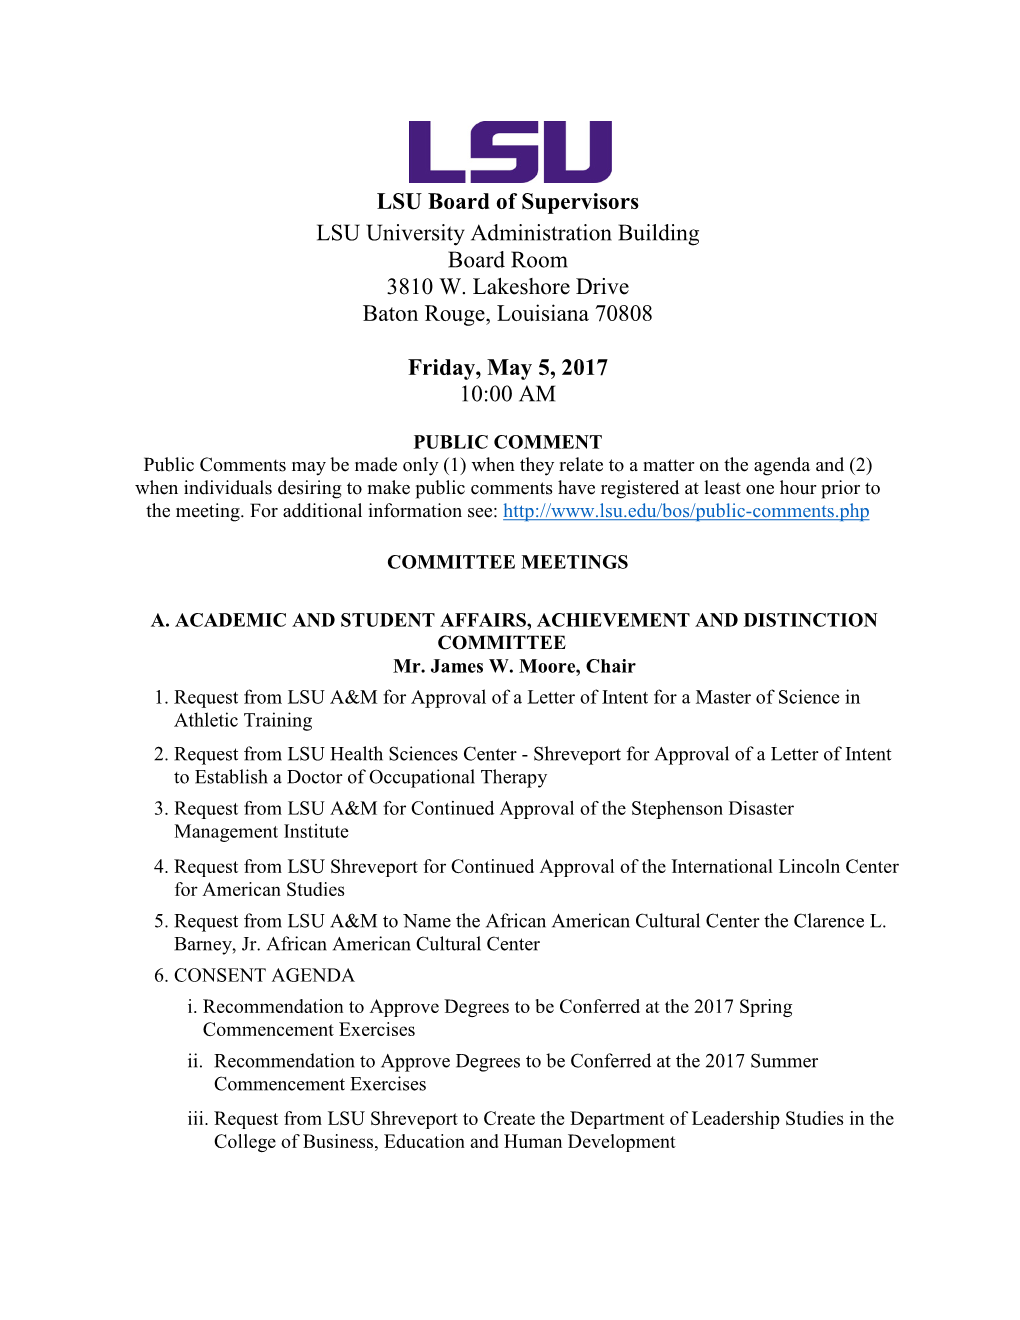 LSU Board of Supervisors Meeting Notice and Agenda